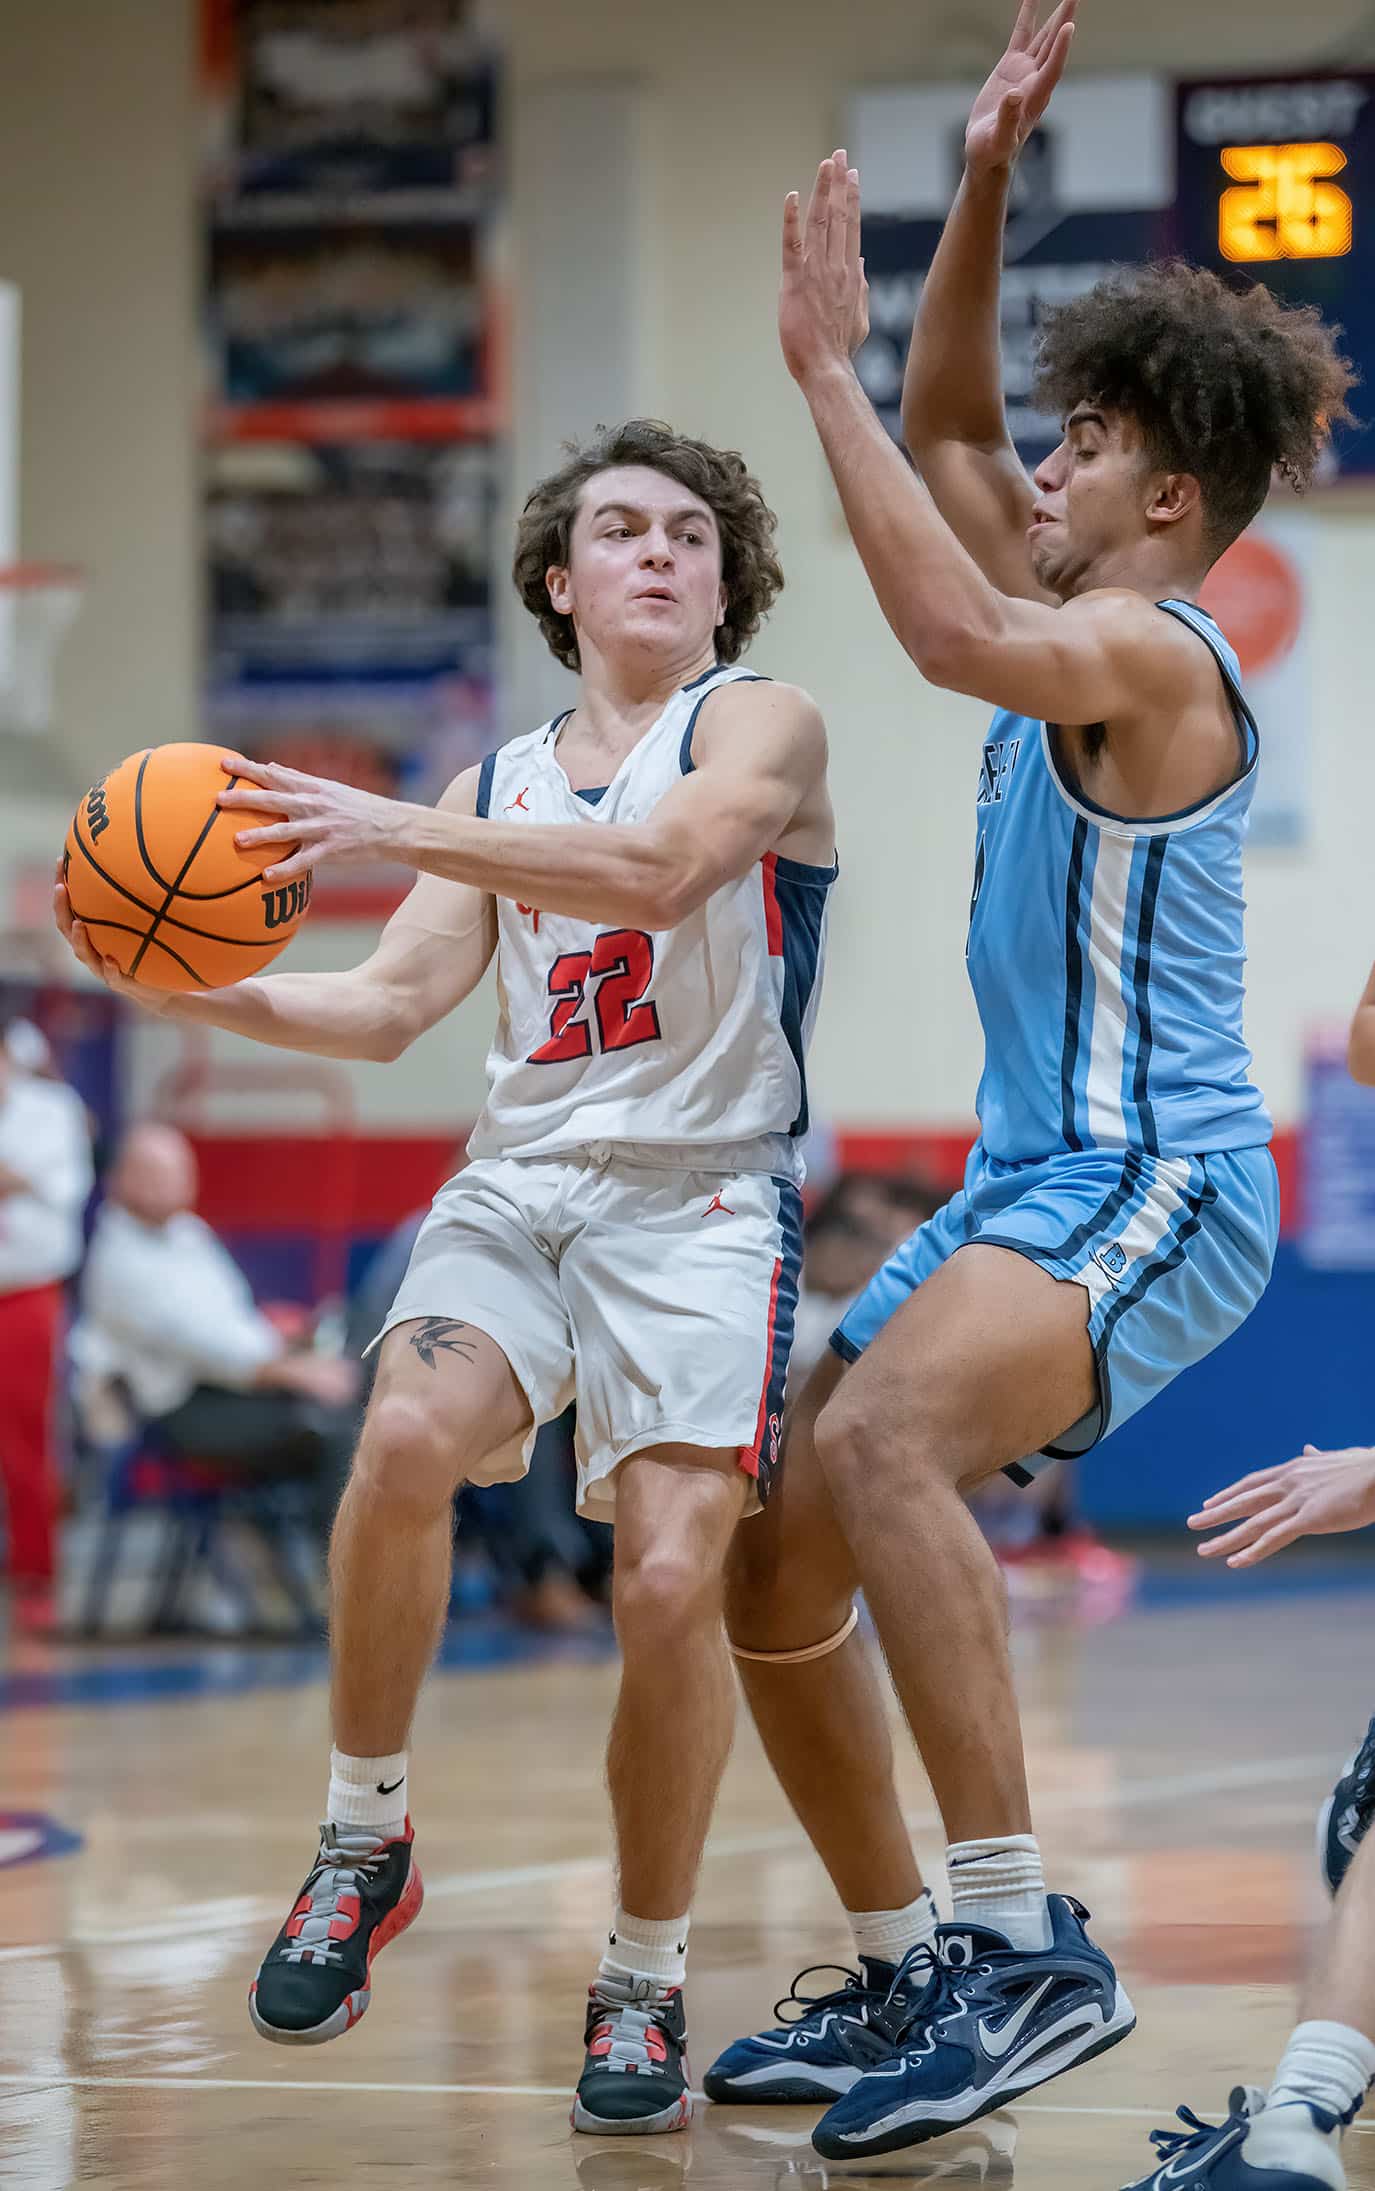 Springstead High, 22, Adrian D’Acunto looks for a way around a Berkely Prep defender Wednesday in the 8th Annual Greg O’Connell Shootout at Springstead High. Photo by JOE DiCRISTOFALO